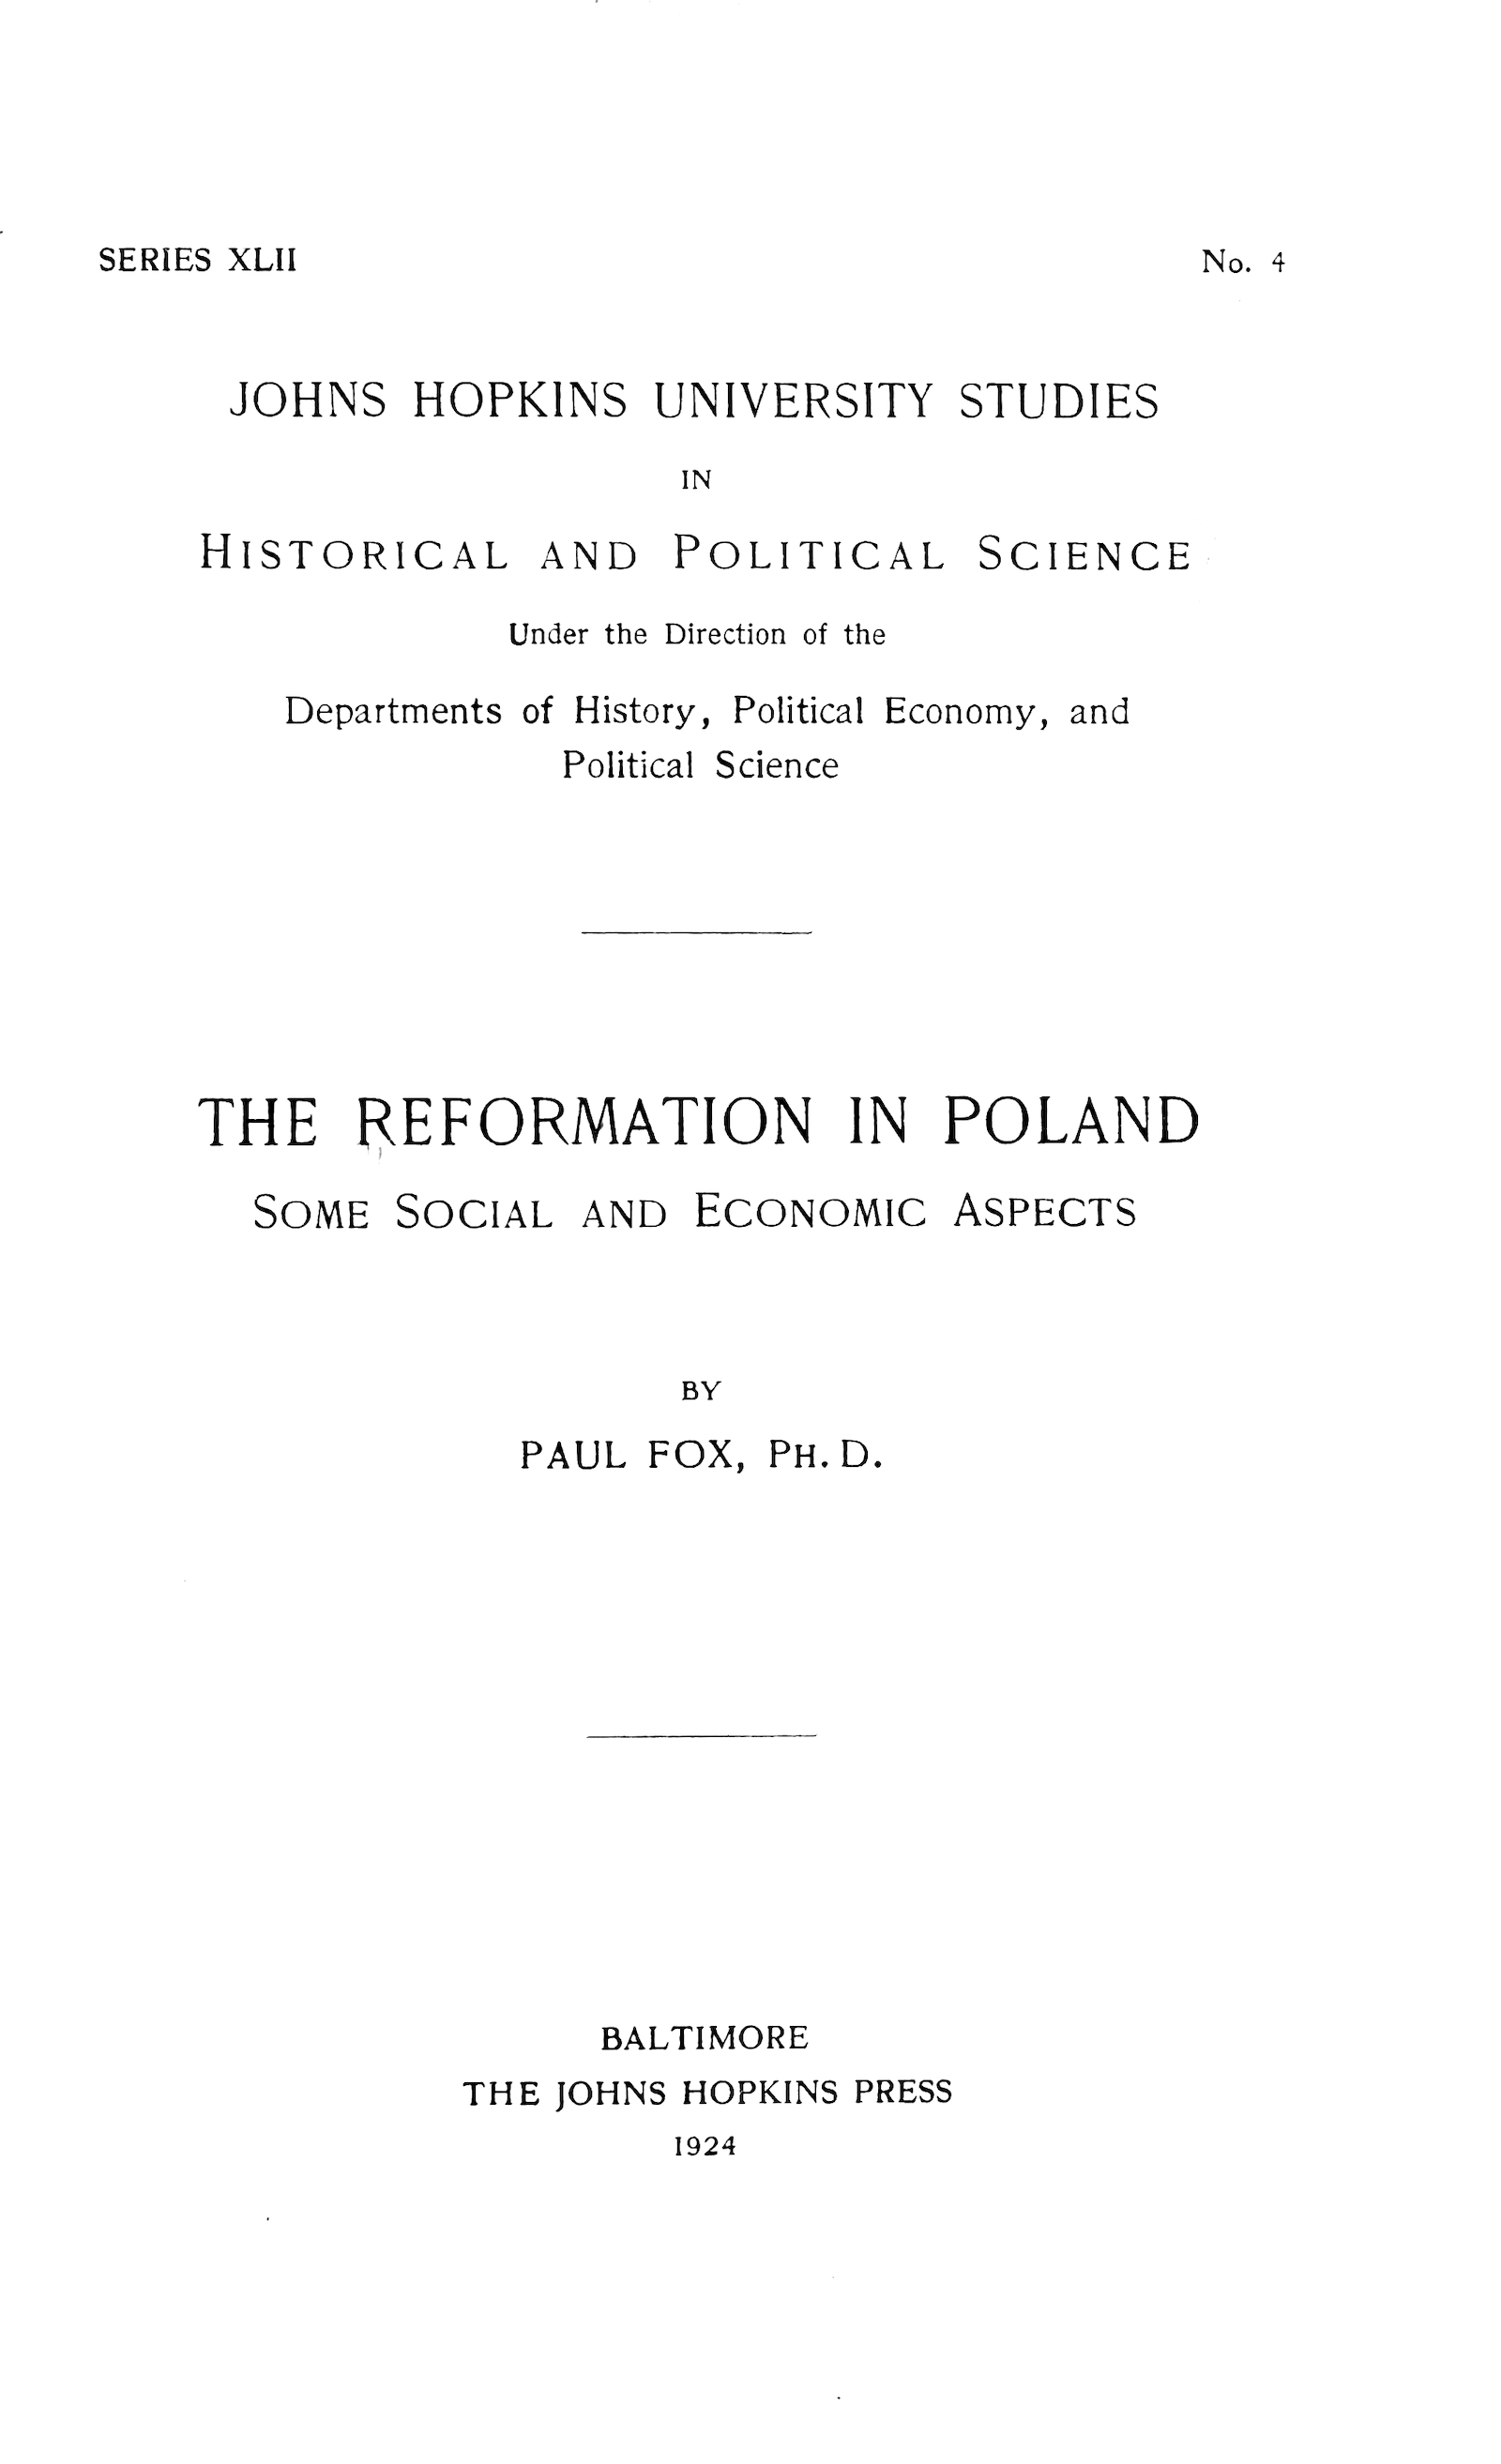 The reformation in Poland